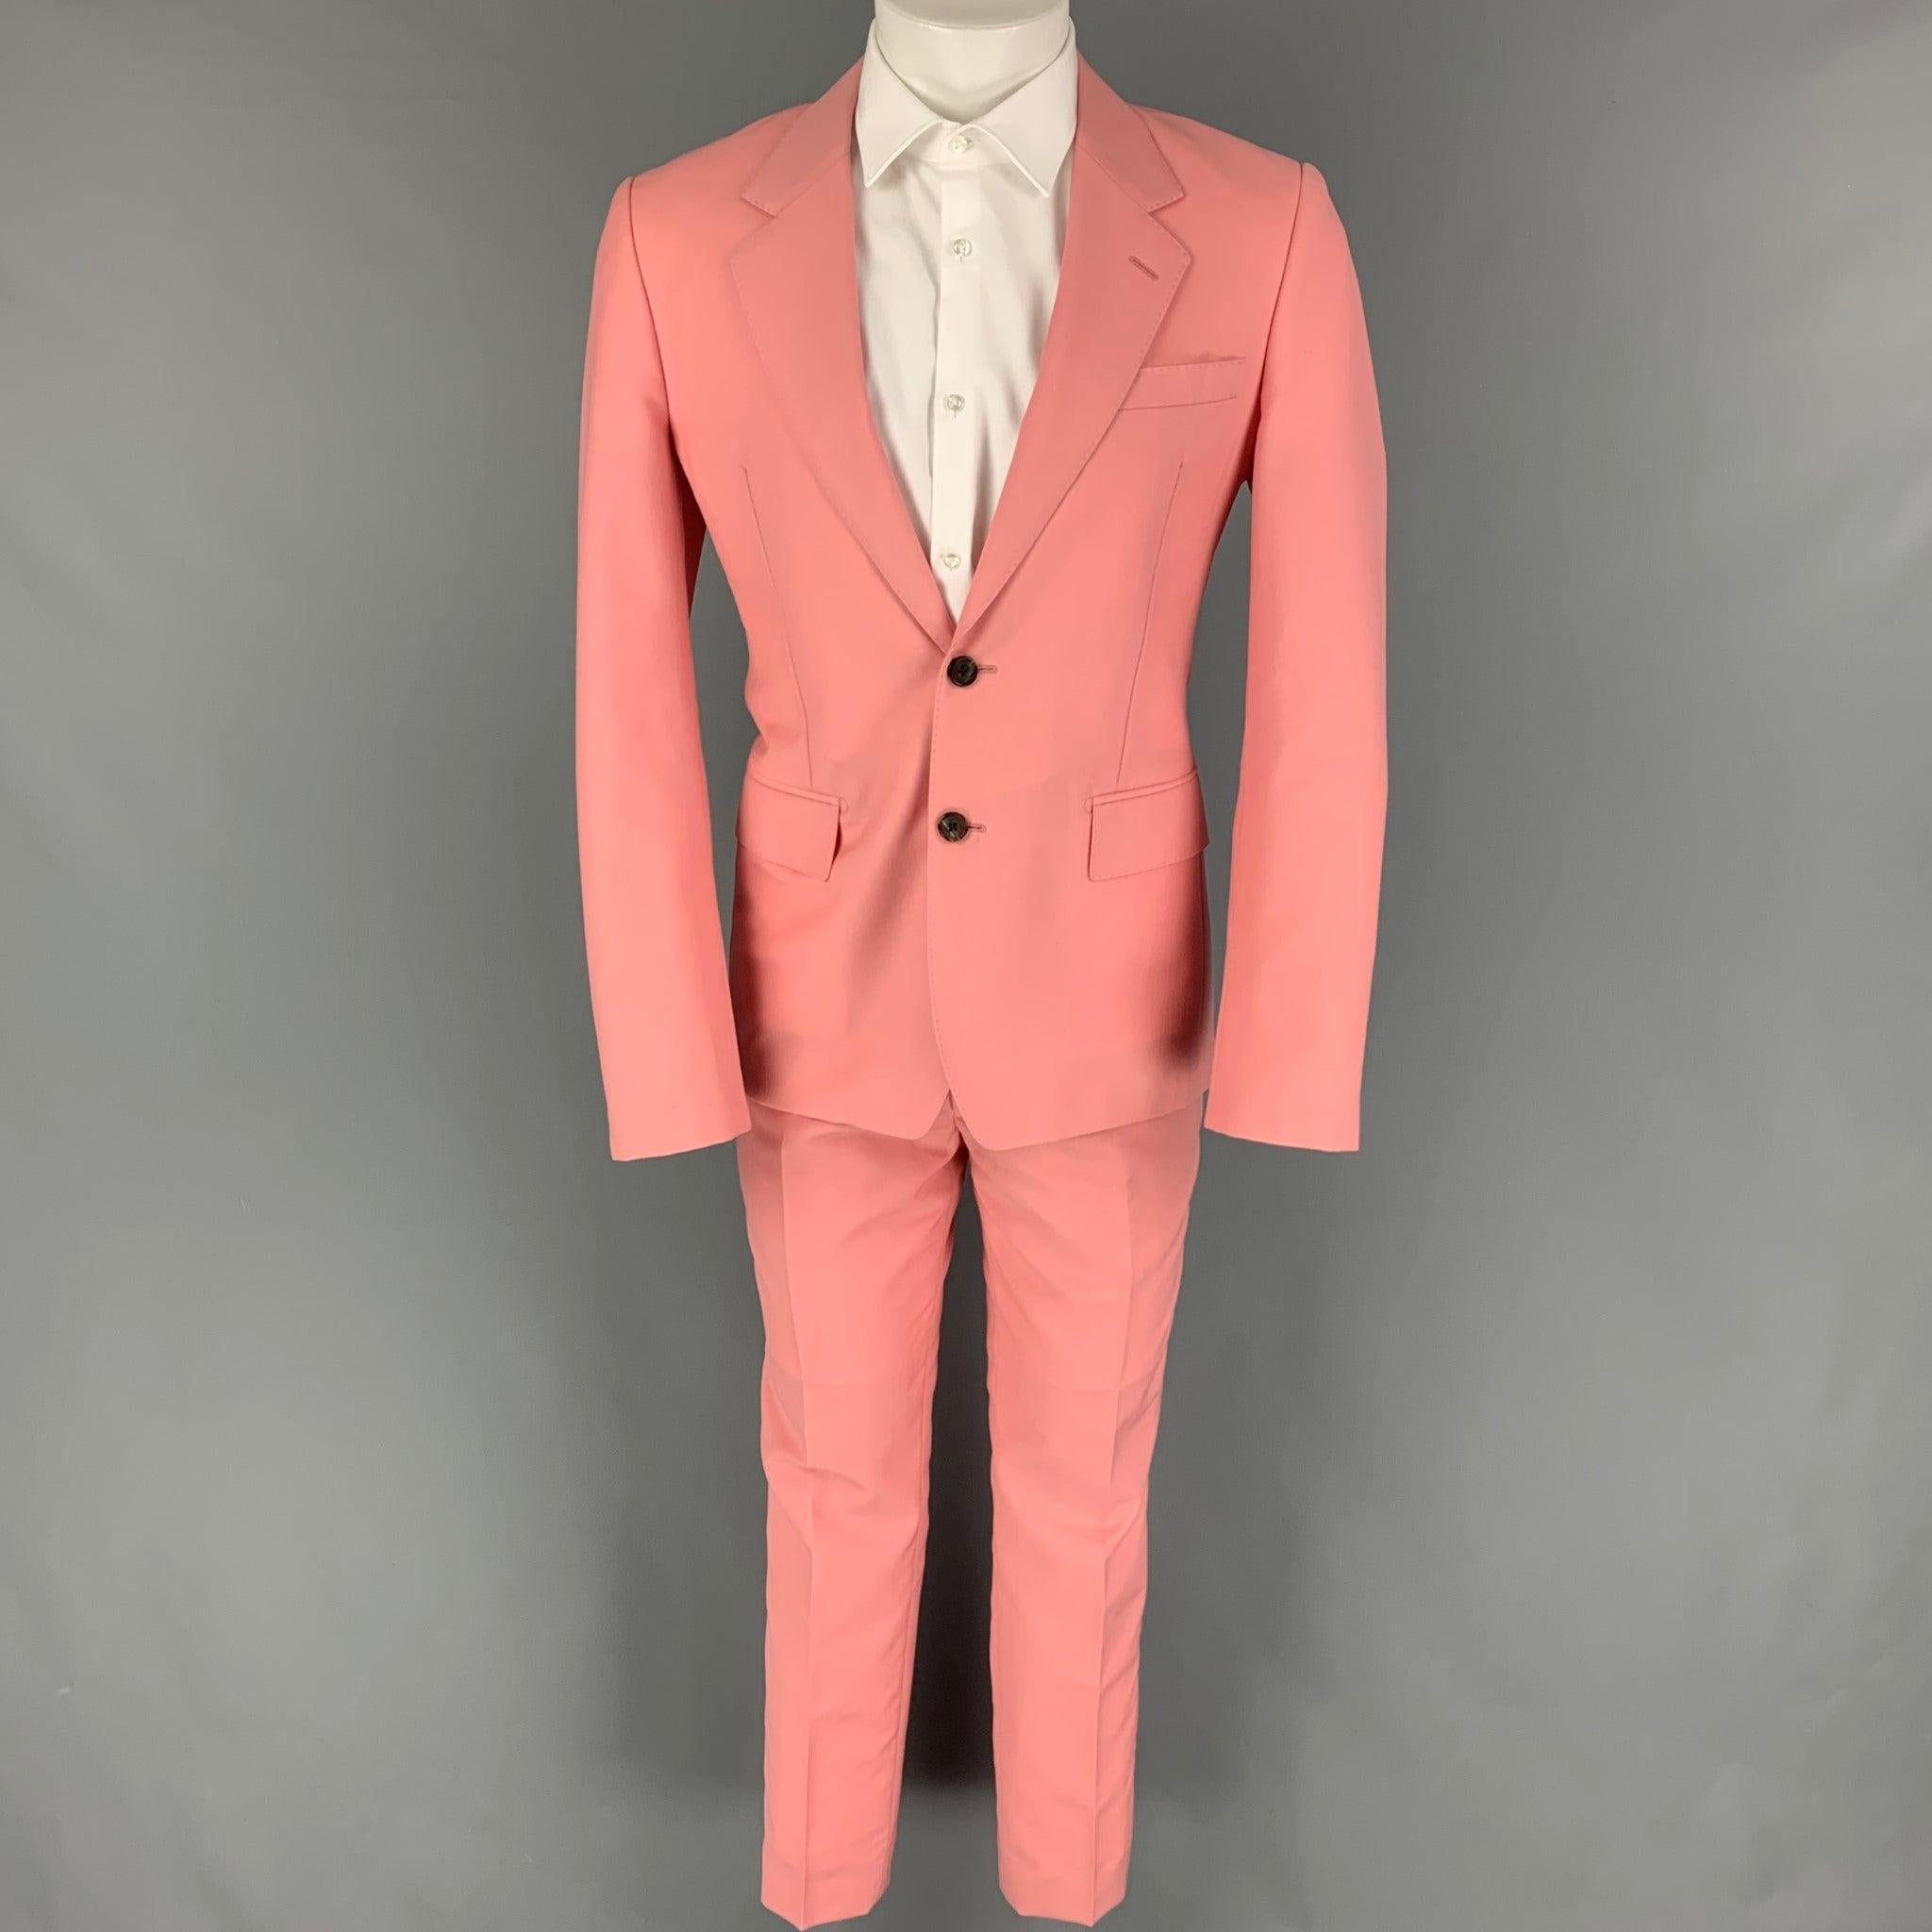 ALEXANDER McQUEEN
suit comes in a pink wool / mohair with a full liner and includes a single breasted,
 double button sport coat with a notch lapel and matching flat front trousers. Made in Italy. Excellent Pre-Owned Condition. 

Marked:   48